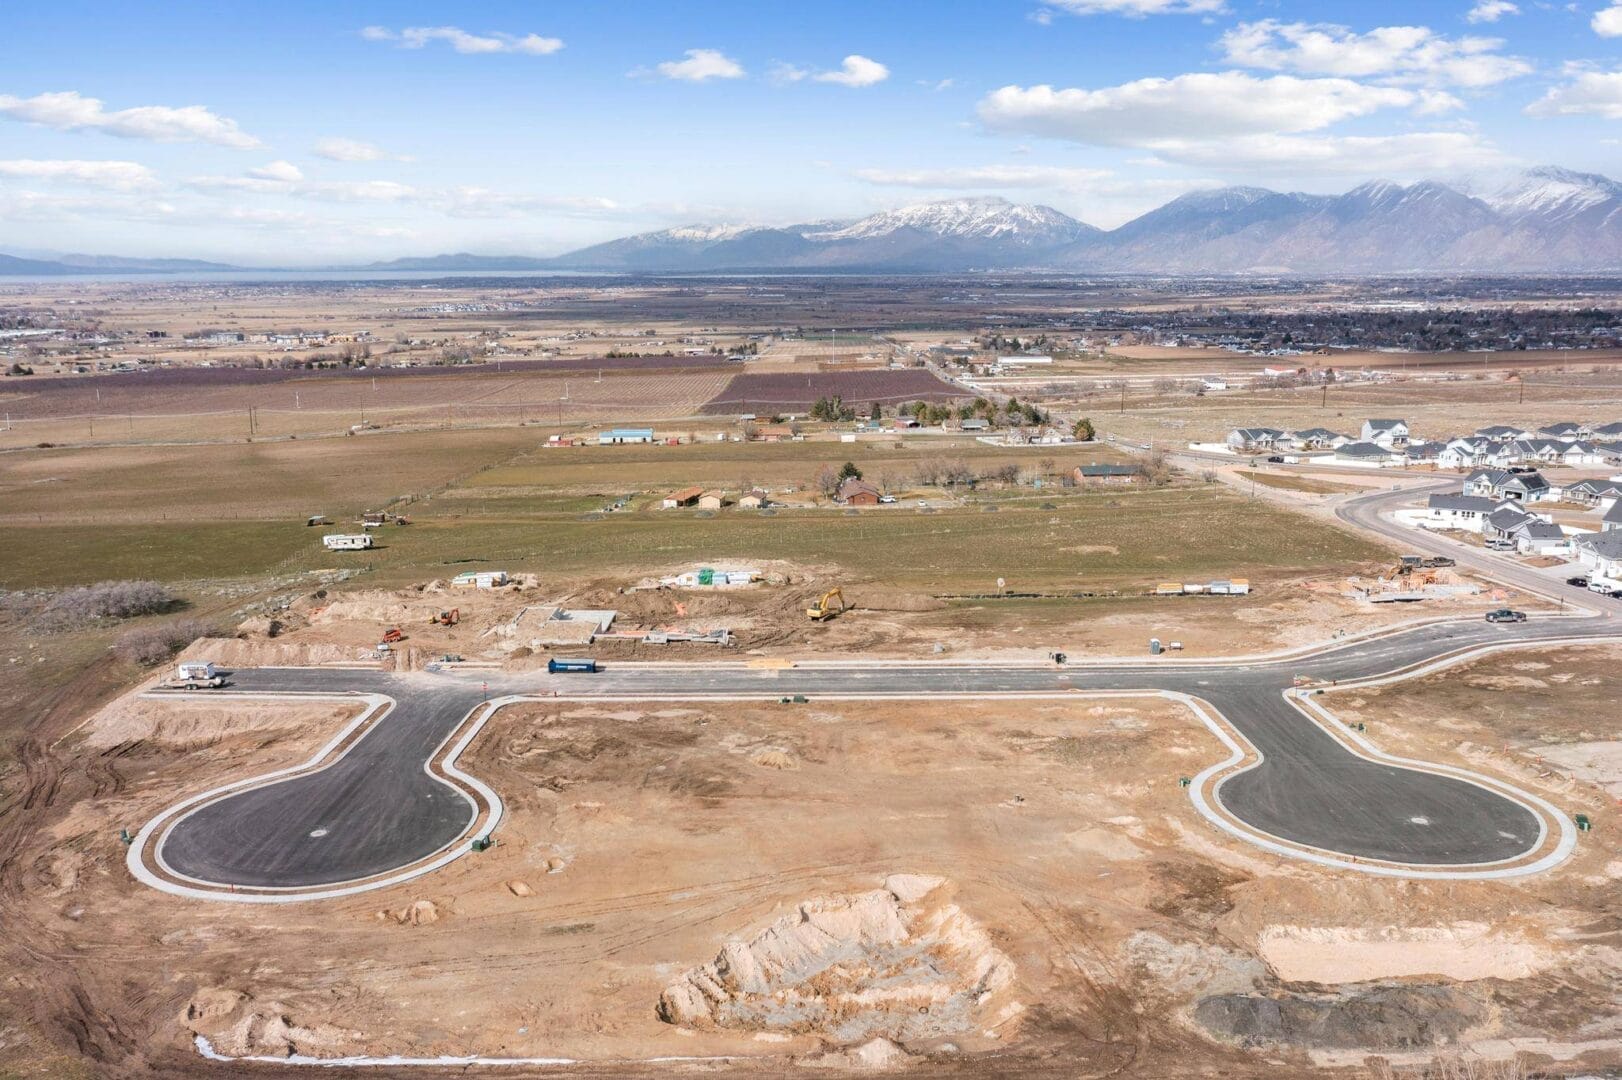 An aerial view of a construction site with mountains in the background overlooking Southern Utah Valley.